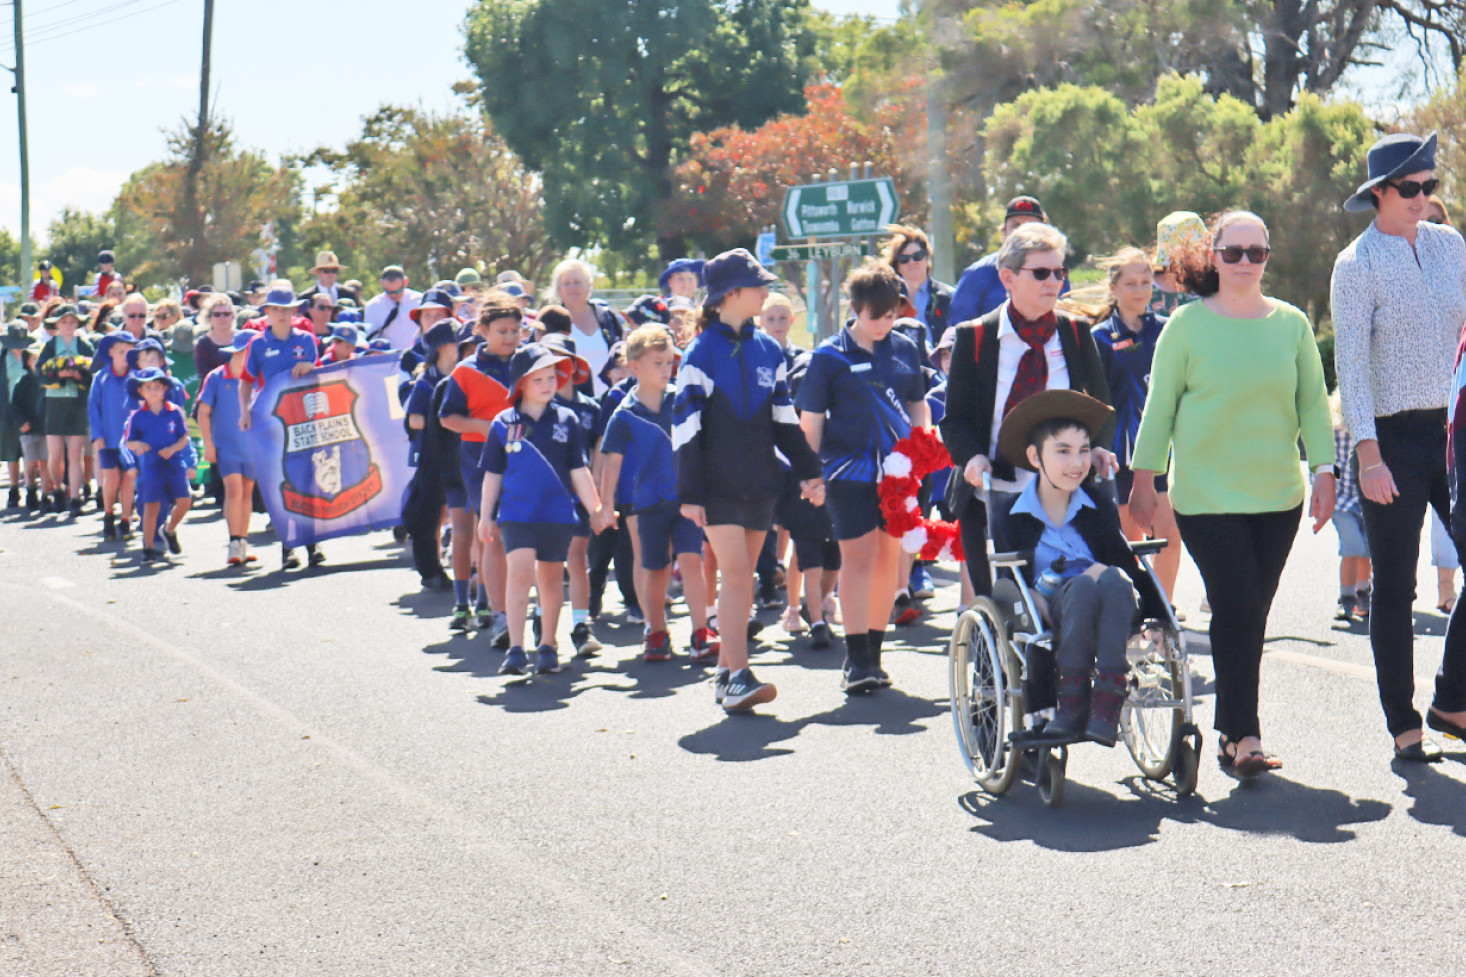 Many students representing their schools participating in the mid-morning parade at Clifton last year.